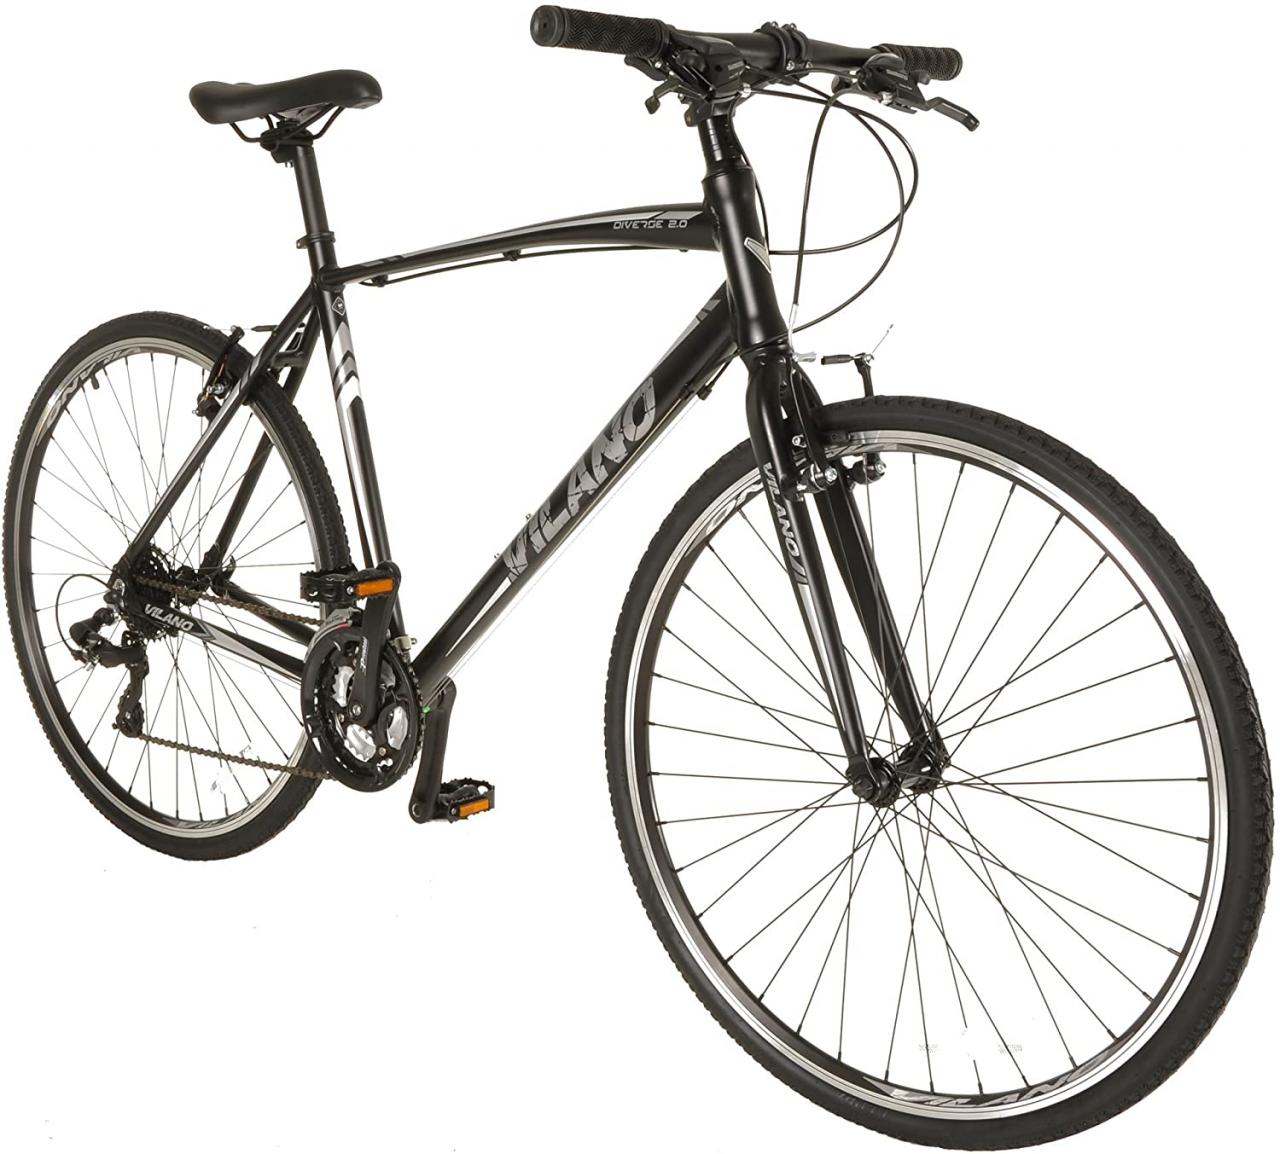 vilano diverse 3.0 performance hybrid road bike 24 - Online Discount Shop  for Electronics, Apparel, Toys, Books, Games, Computers, Shoes, Jewelry,  Watches, Baby Products, Sports & Outdoors, Office Products, Bed & Bath,